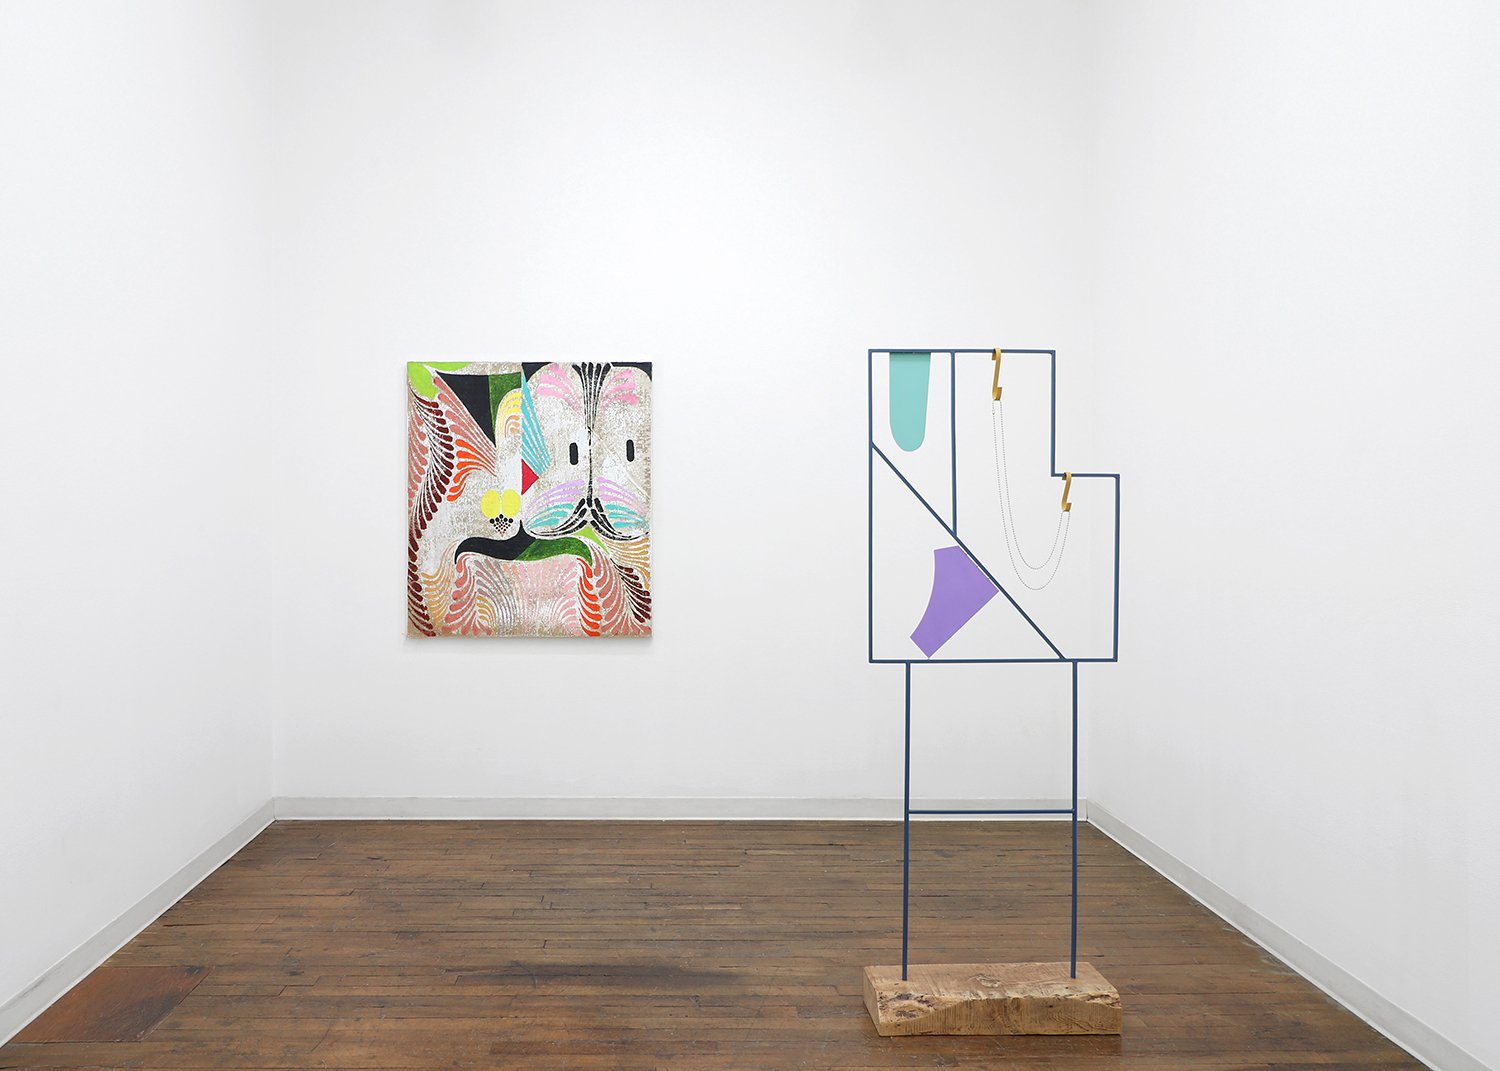  Installation shot of  Cosmic Fishing  at Devening Projects. Work paired with Guzzo Pinc’s show  Fantasia.   Right: Untitled (Cosmic Fishing #1) Powder coated steel, steel, paint, magnets, ball chain, wood 72 x 28 x 8 inches 2021  Left: Guzzo Pinc 